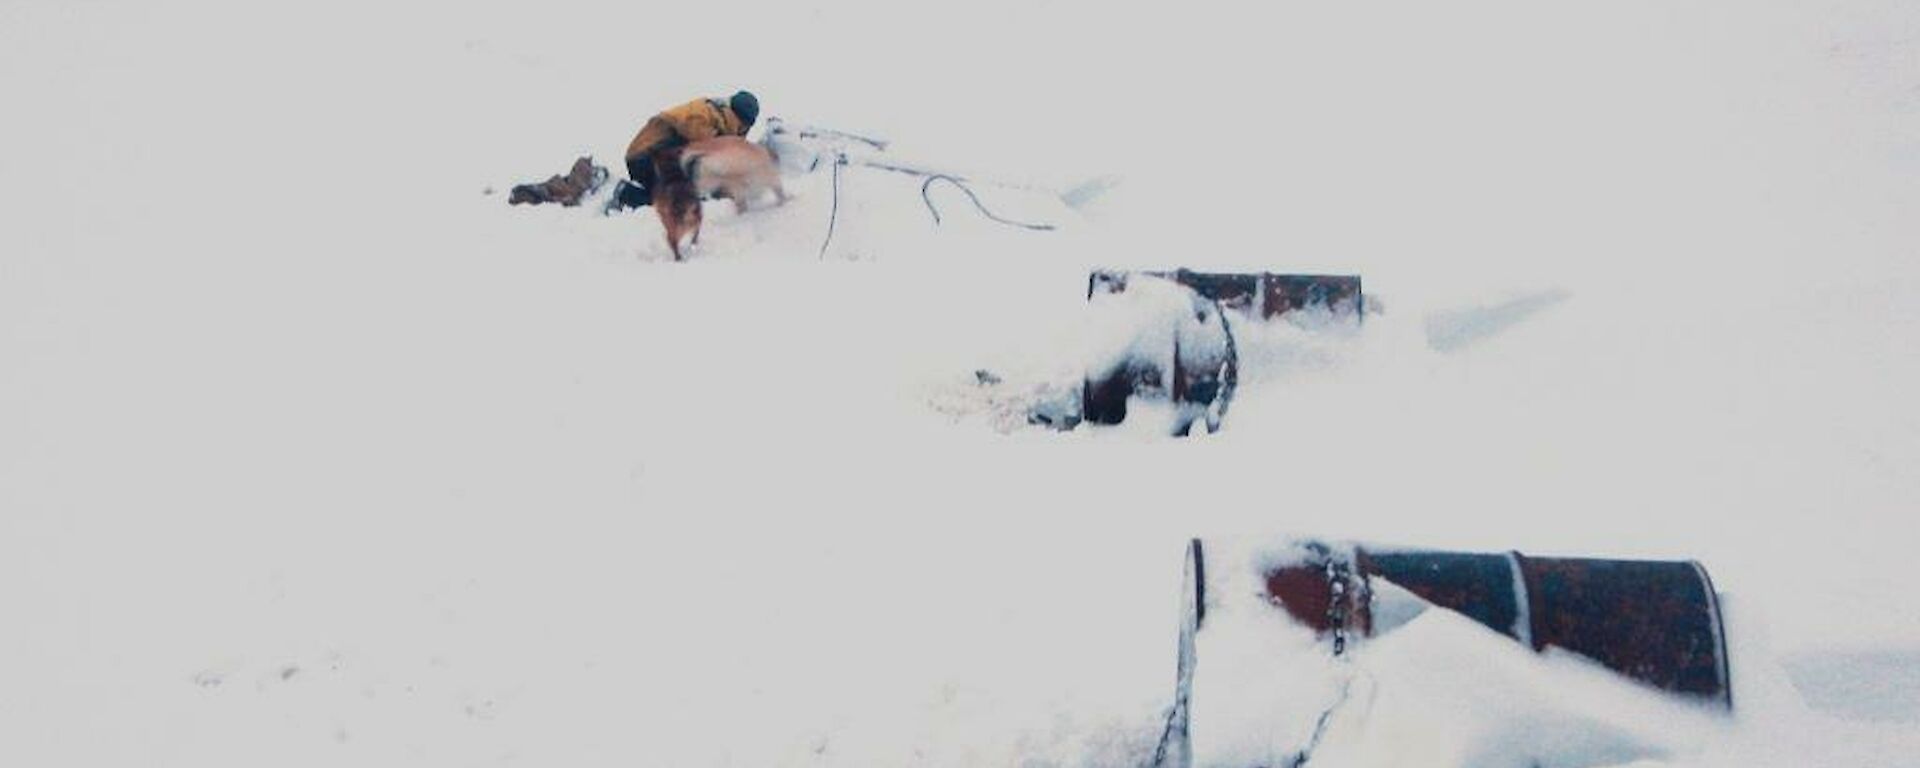 The scene is of three kennels (made from drums) mostly buried in deep snow. Ange and a couple of the dogs digging out the snow from the kennels at Eitel hut